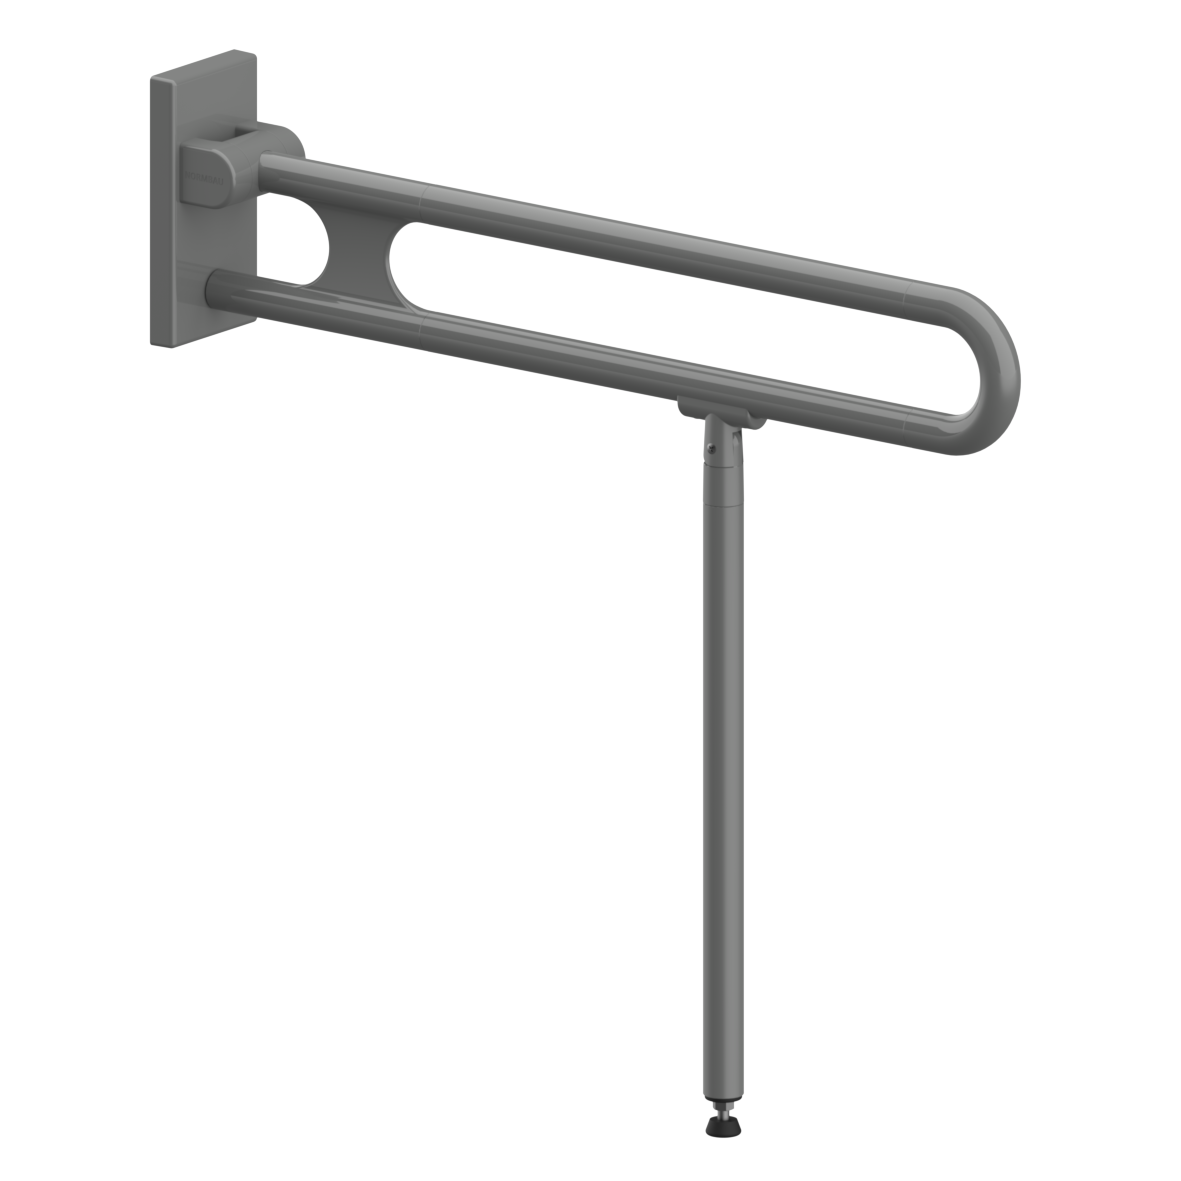 Nylon Care Lift-up support rail vario, with base plate, with floor support (750 mm), left and right, L = 850 mm, Dark grey